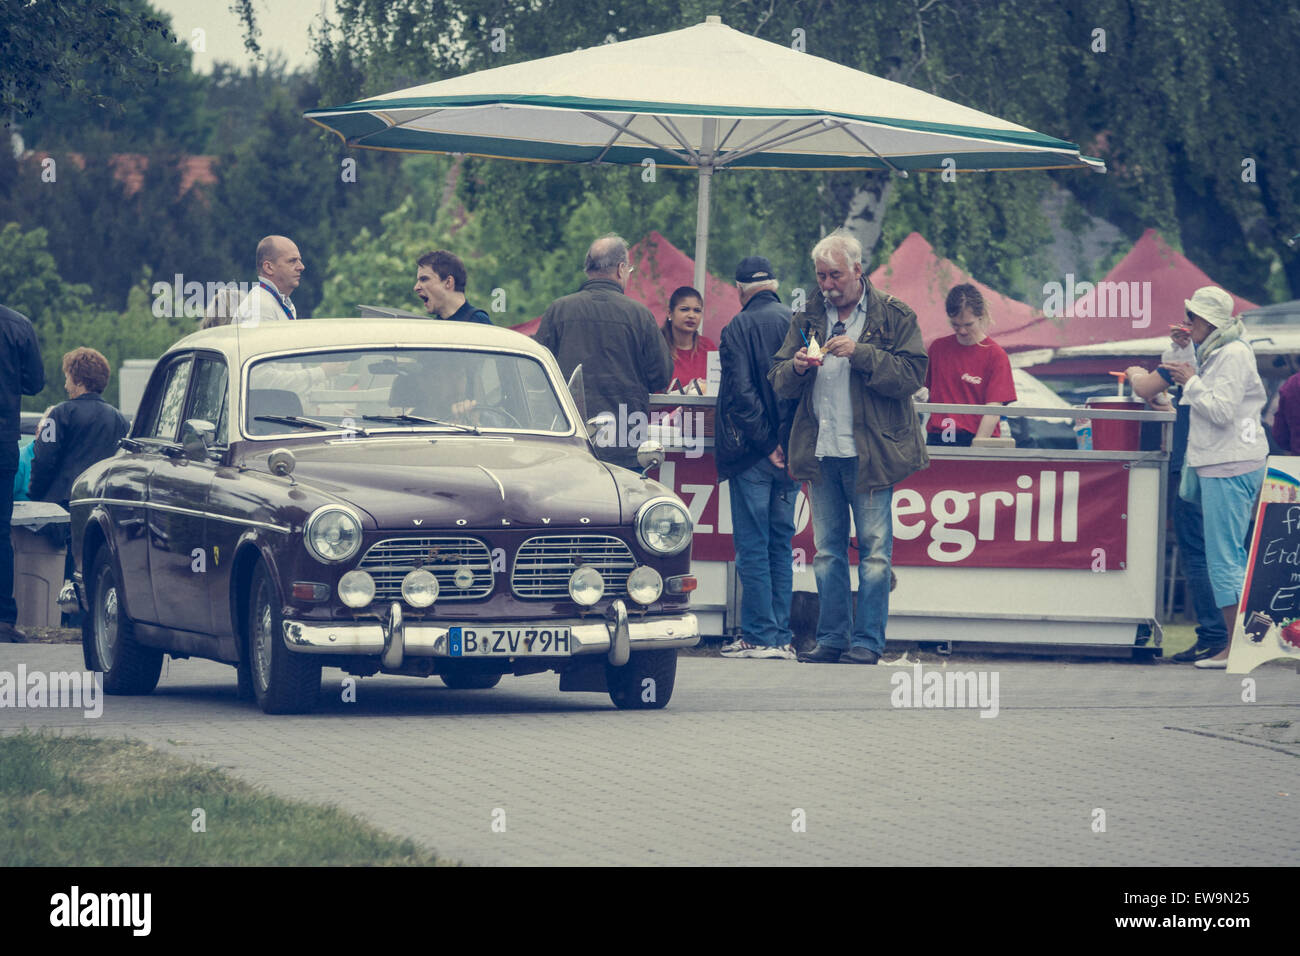 PAAREN IM GLIEN, GERMANY - MAY 23, 2015: Executive car Volvo Amazon. Stylization. Vintage toning. The oldtimer show in MAFZ. Stock Photo